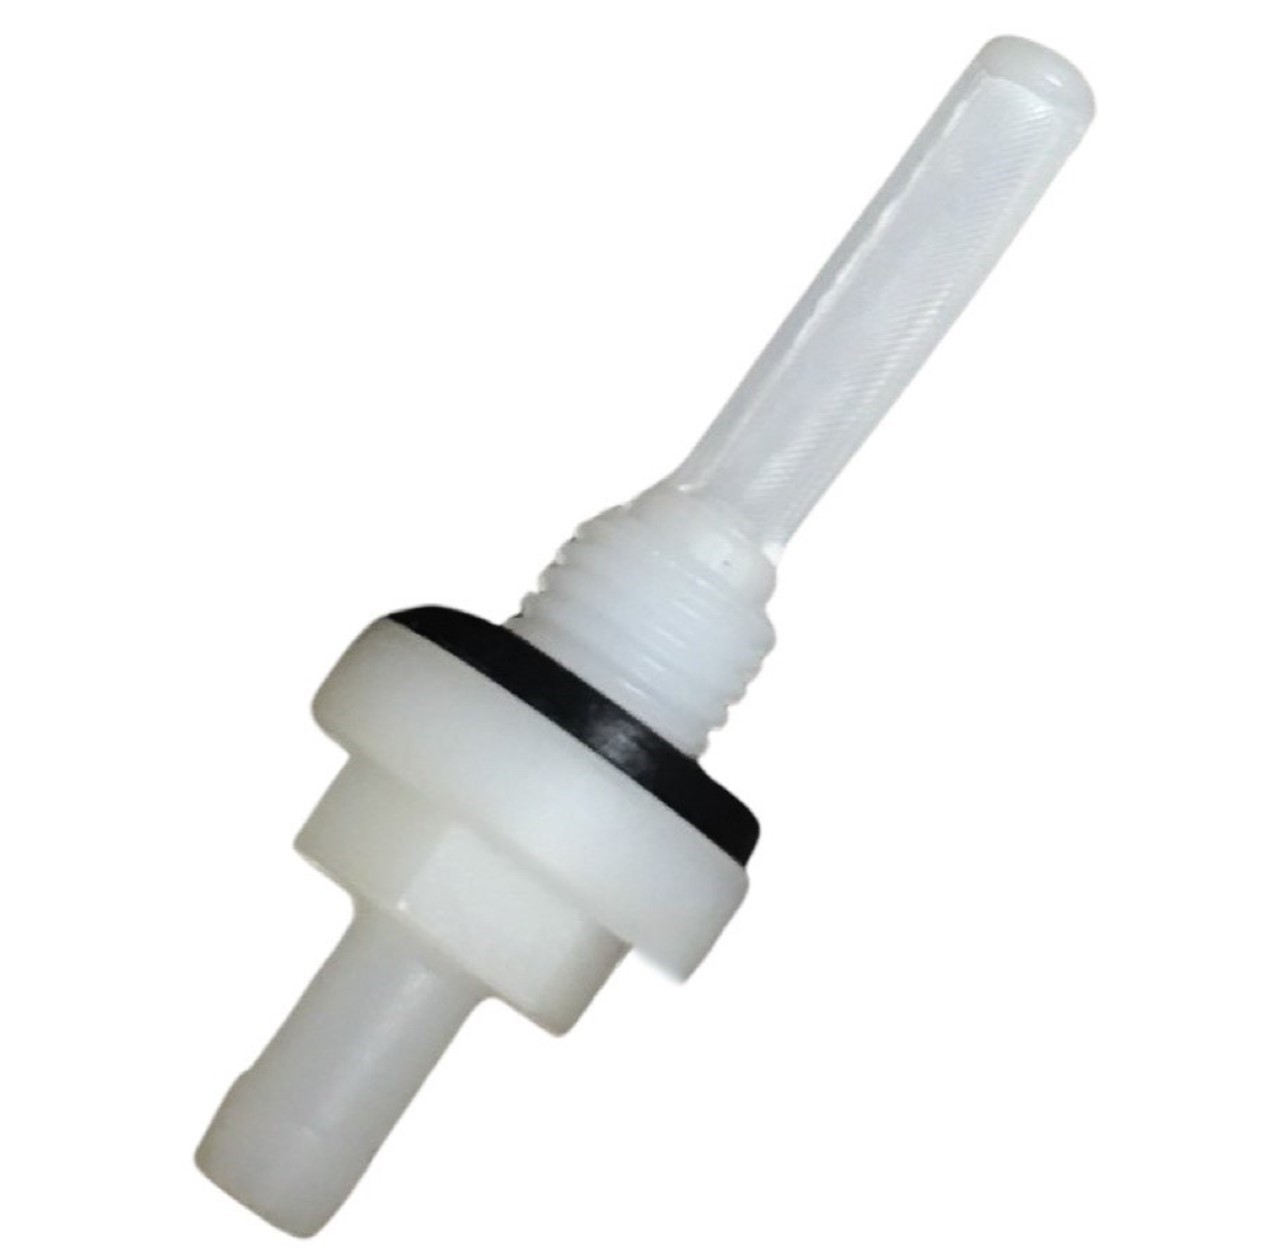 FUEL FILTER Fits into Gas Tanks of Many Gokarts, Minibikes, Power Equipment Etc. Thread OD=9.8mm Nut OD=12mm L=53mm - Click Image to Close